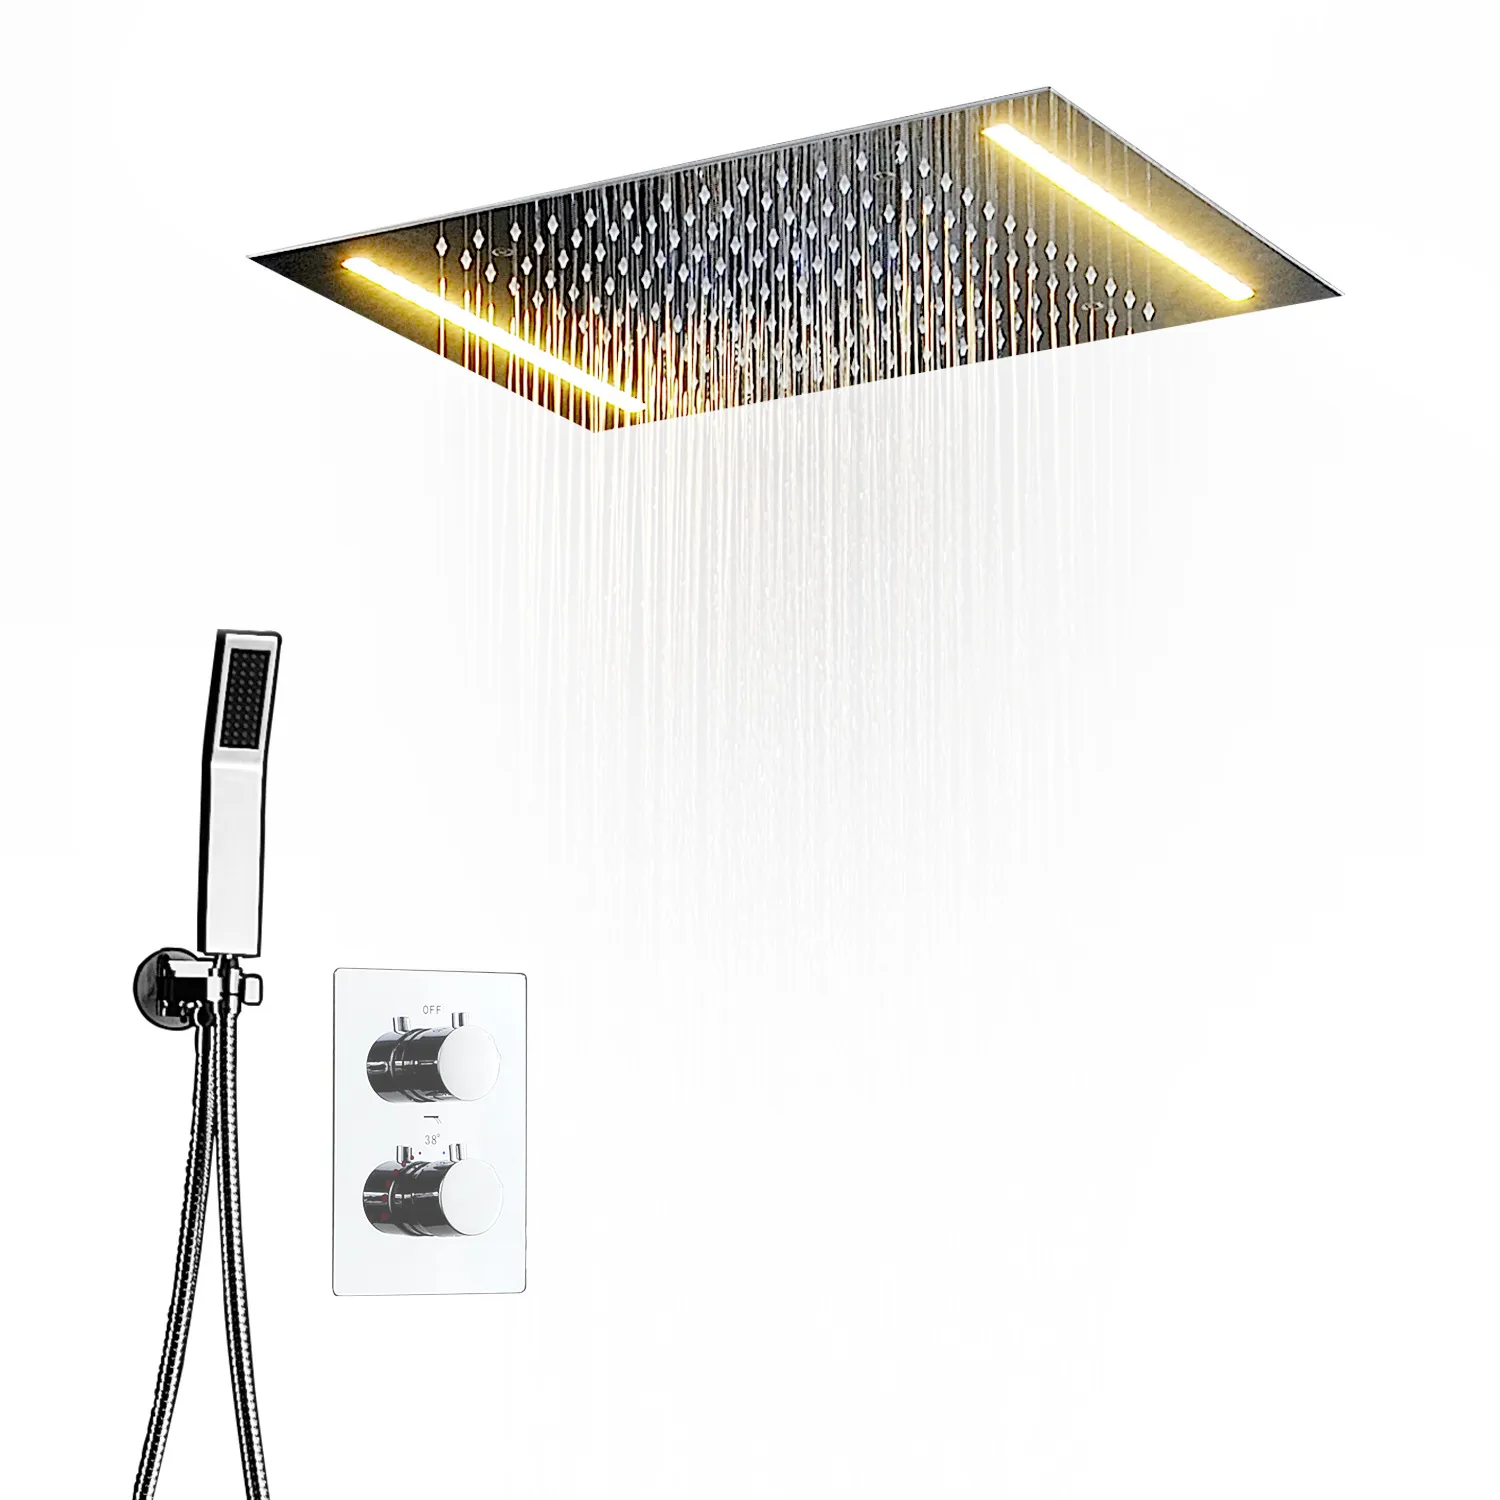 LED Multi-functional Lights Bathroom Shower Set Accessories Faucet Panel Tap and cold water Mixer LED Ceiling Head Rainfall Wa3073